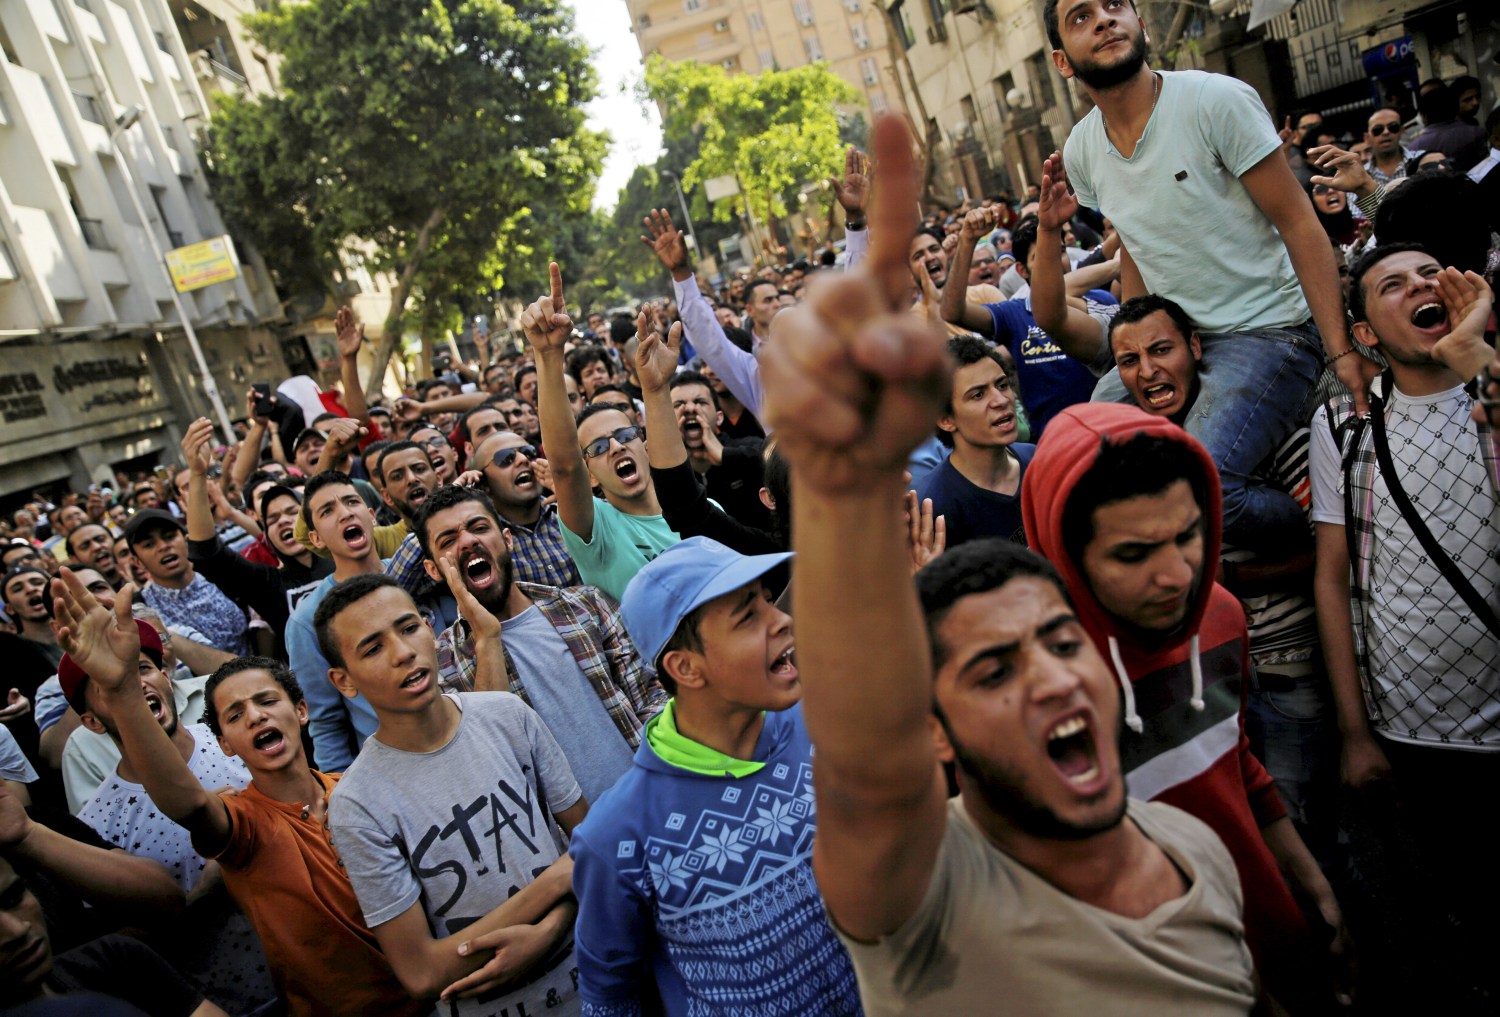 Egyptian protesters and Muslim Brotherhood members shout slogans against President Abdel Fattah al-Sisi and the government during a demonstration protesting the government's decision to transfer two Red Sea islands to Saudi Arabia, in front of the Press Syndicate in Cairo, Egypt, April 15, 2016. REUTERS/Amr Abdallah Dalsh - RTX2A5NC